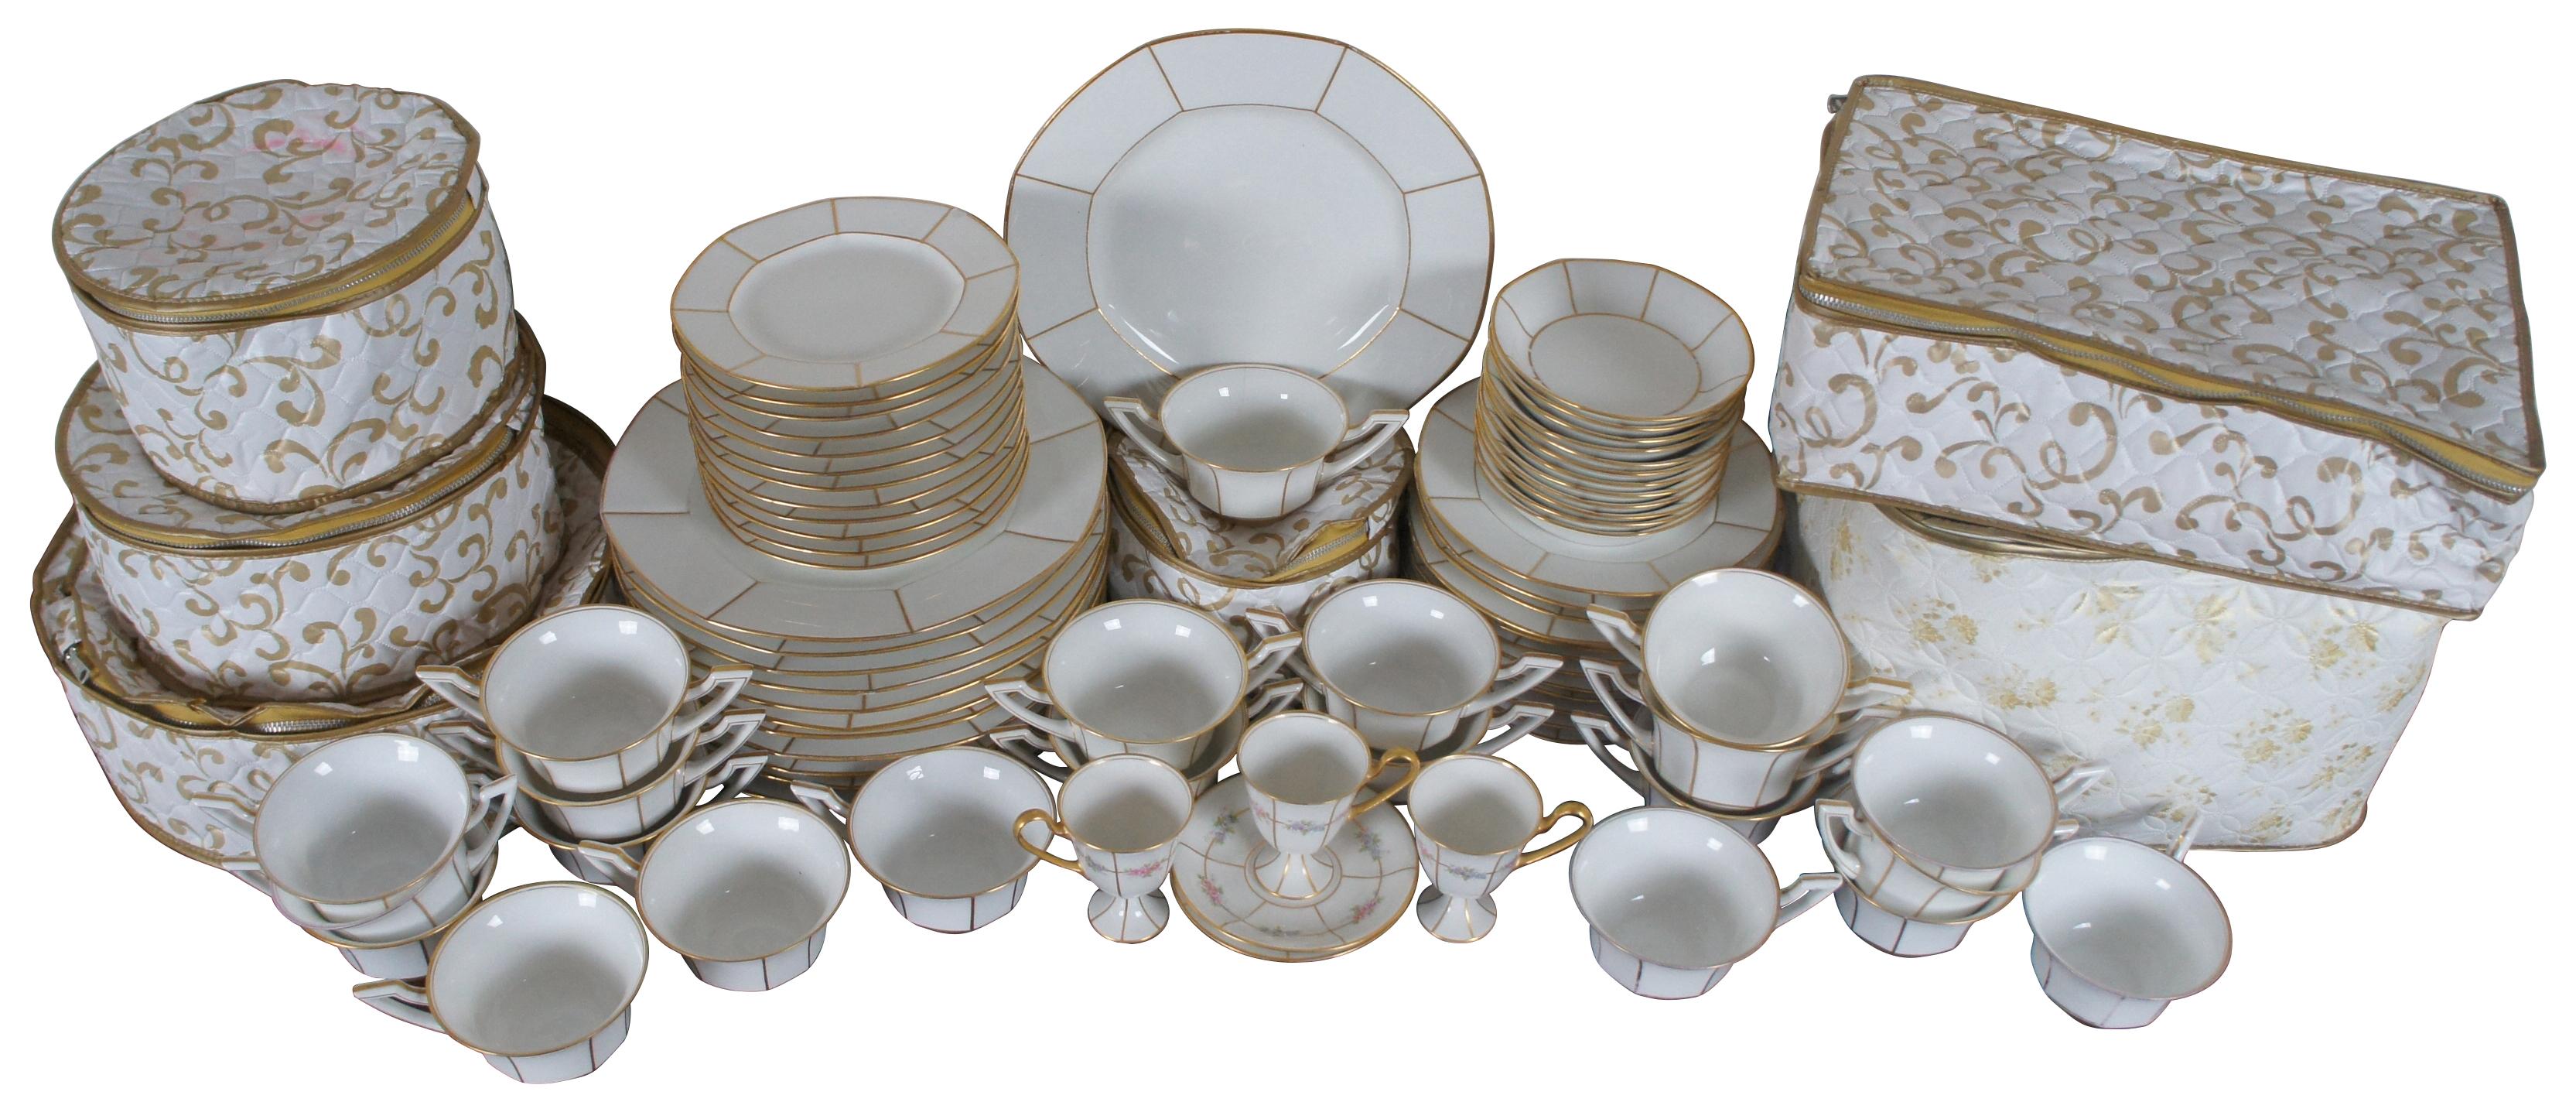 Antique 19th century 75 piece J Pouyat Limoges France porcelain dinnerware set, pattern POY254, with gilded accents and flowers on the demitasse cups.

Measures: 12 dinner plates - 9.875” x 1” / 12 salad plates - 7.375” x 0.75” / 12 bread plates -